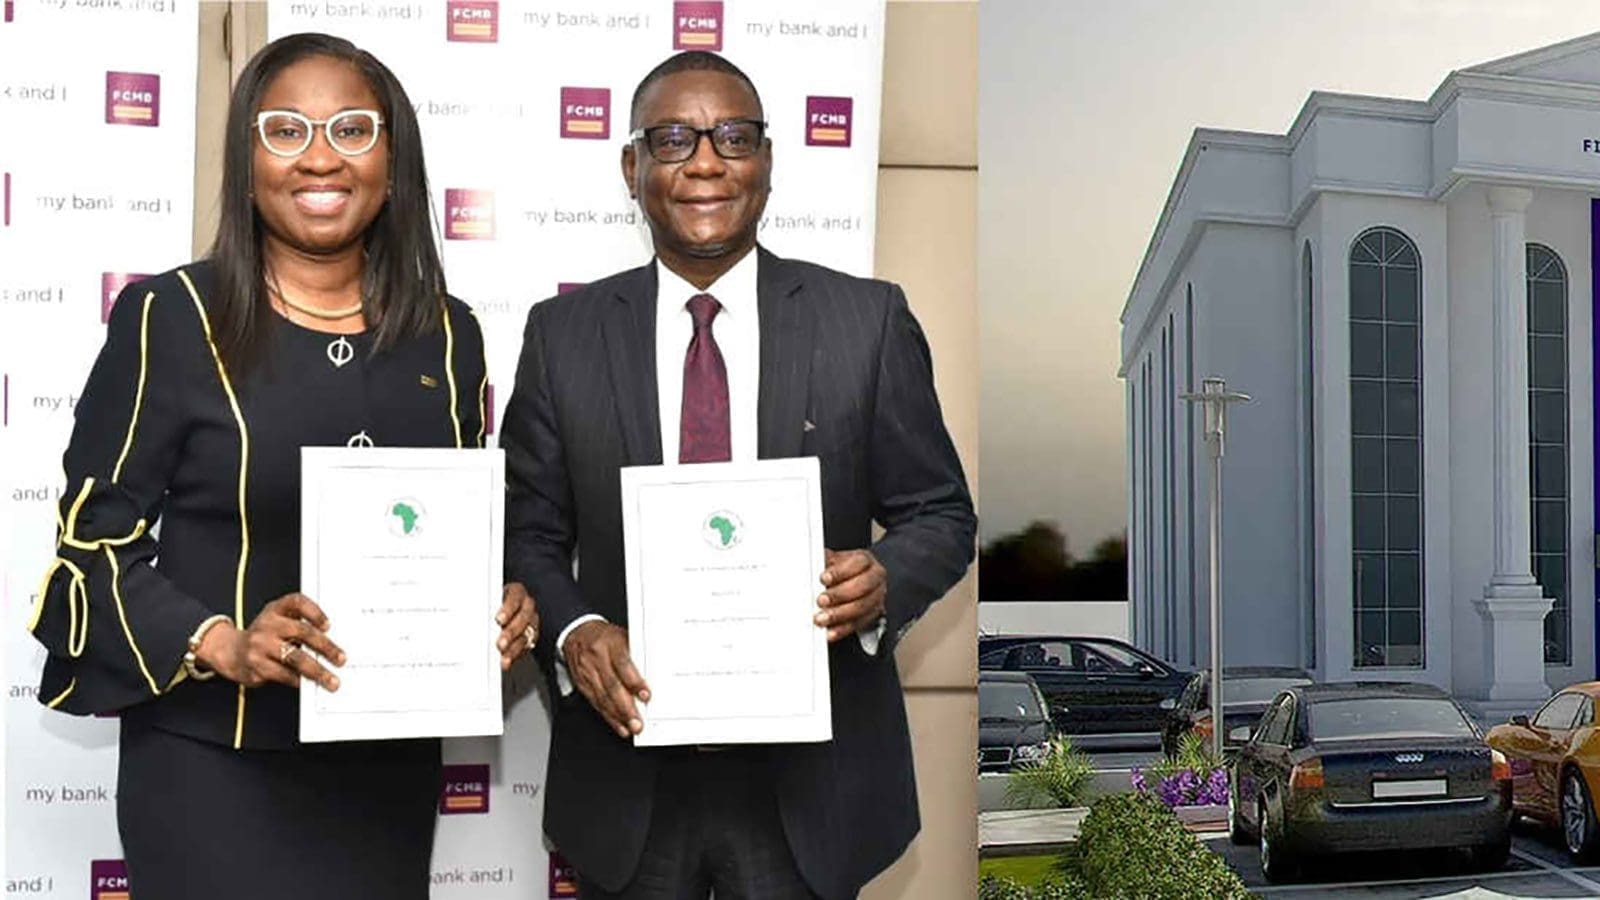 AfDB issues US$50m credit line to Nigeria’s FCMB to support women-owned businesses